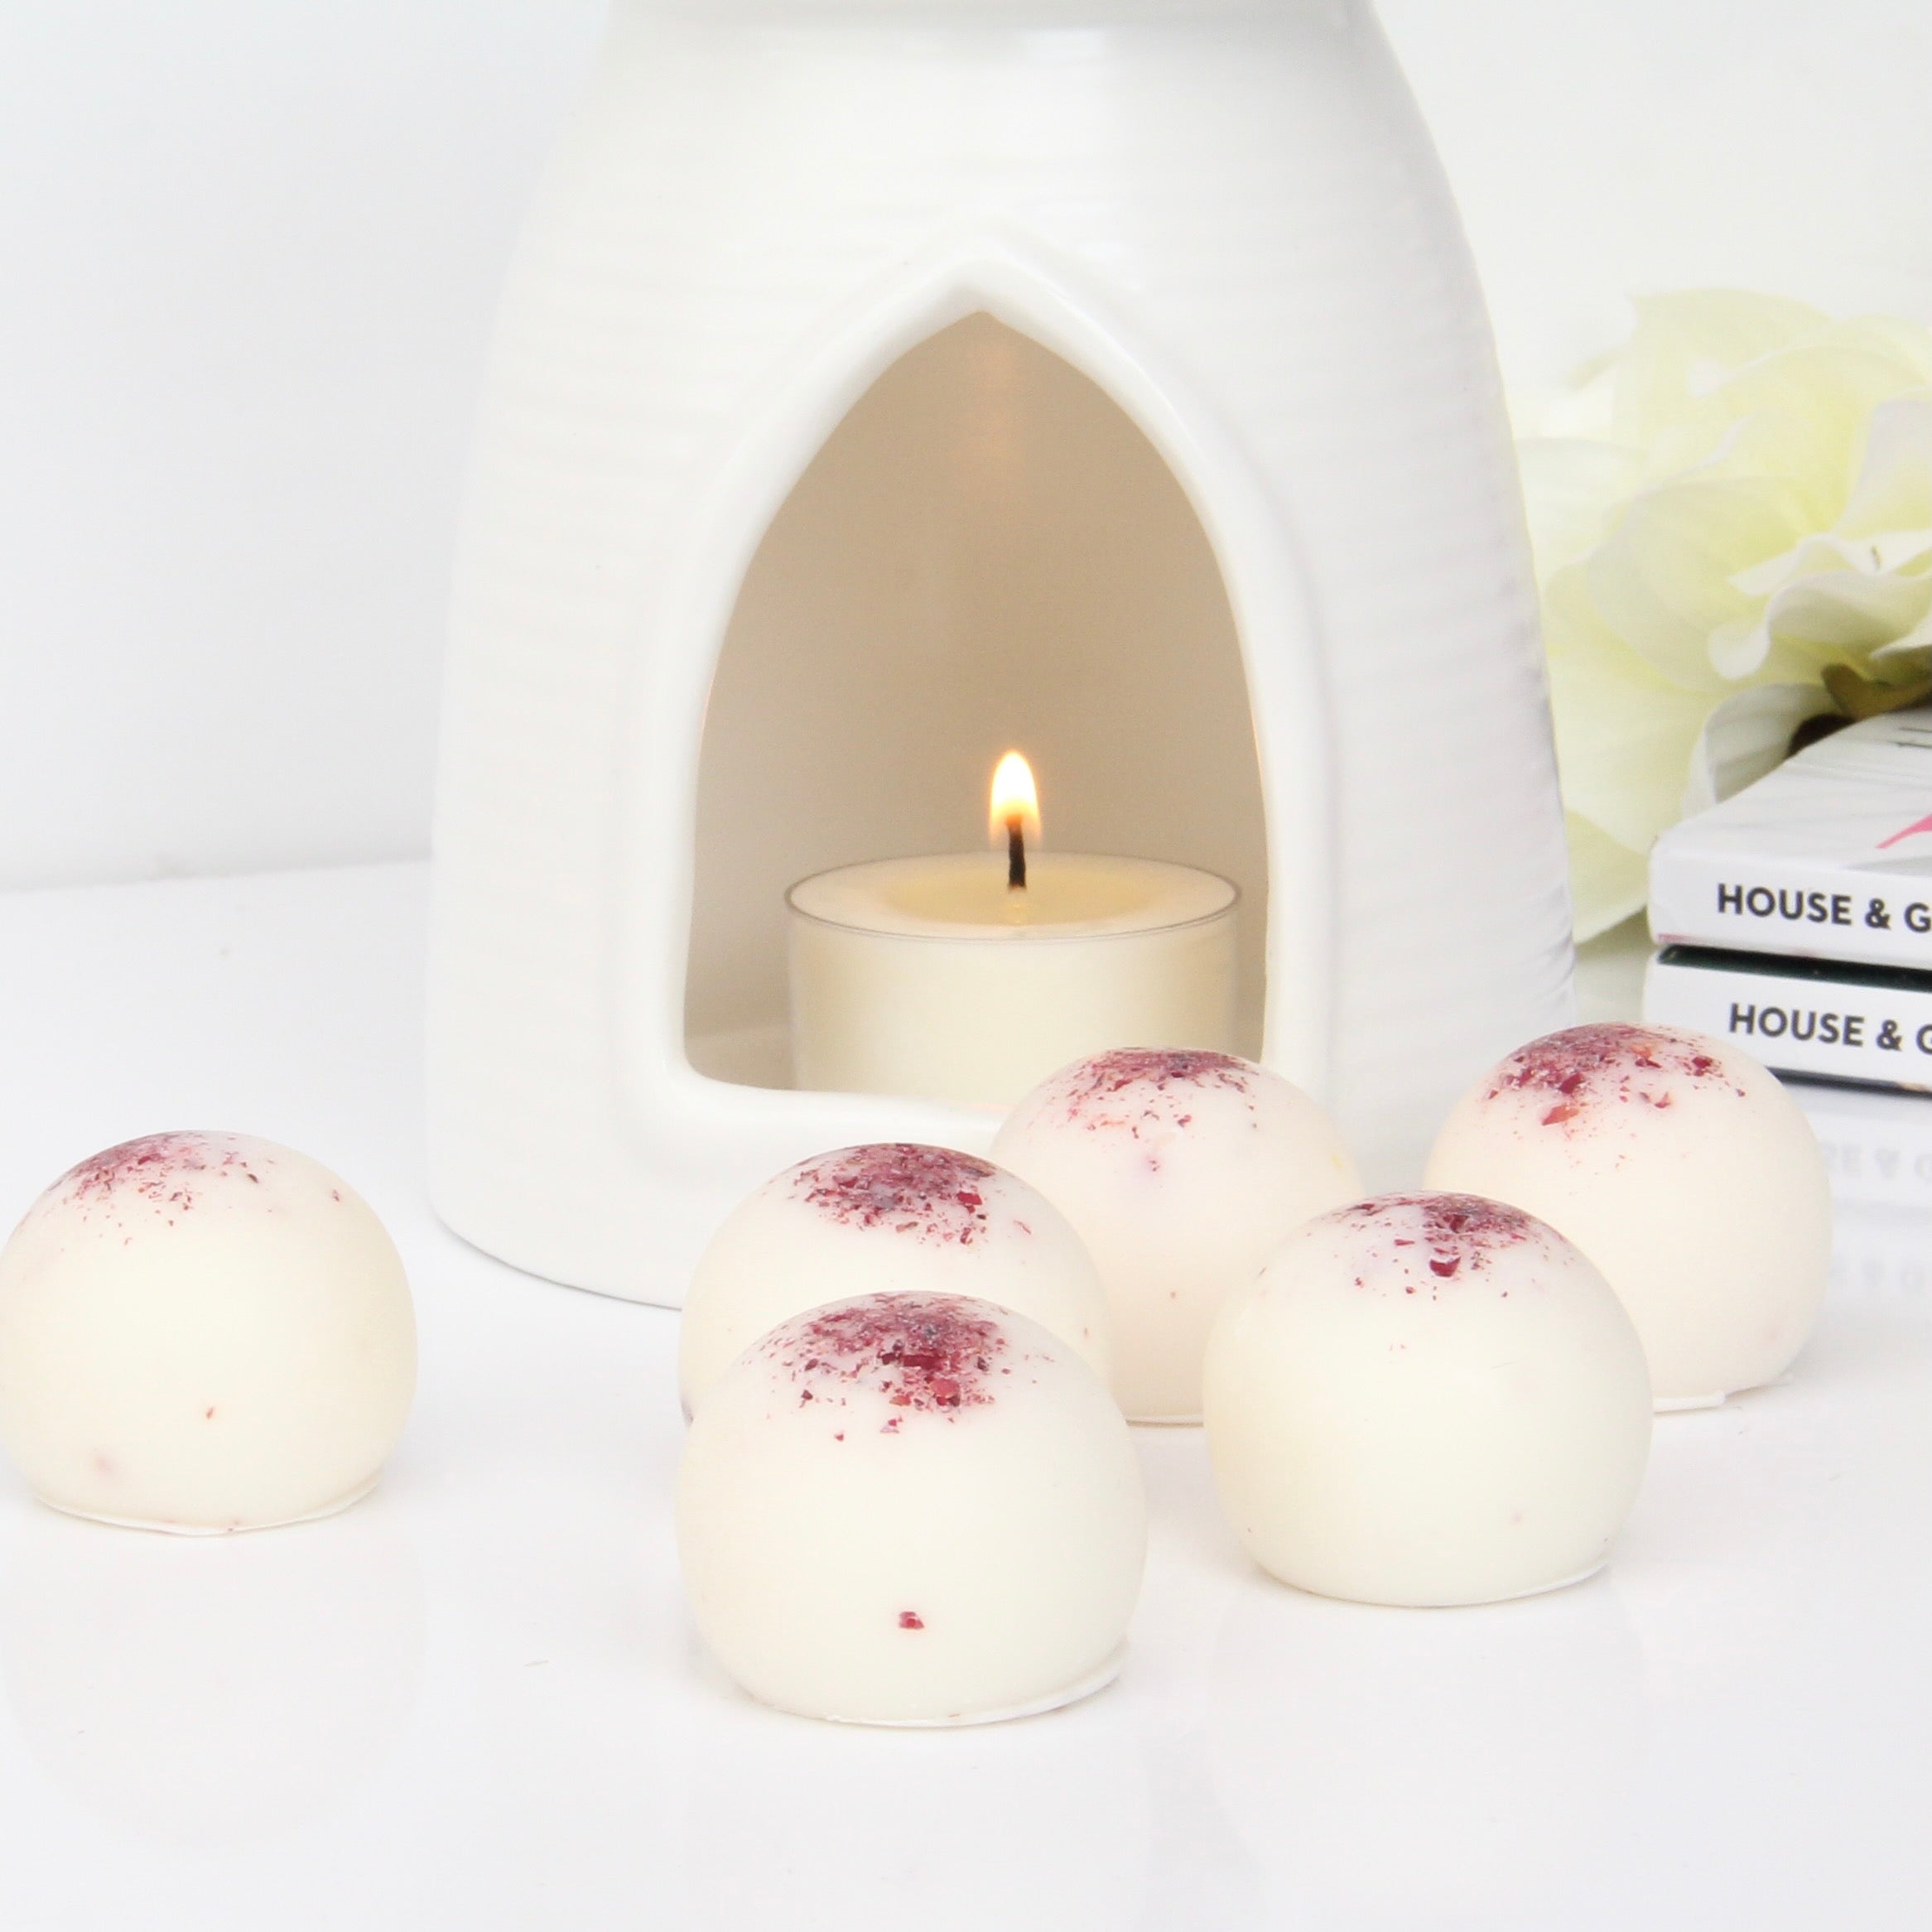 Peony & Blush Suede Scented Wax Melts